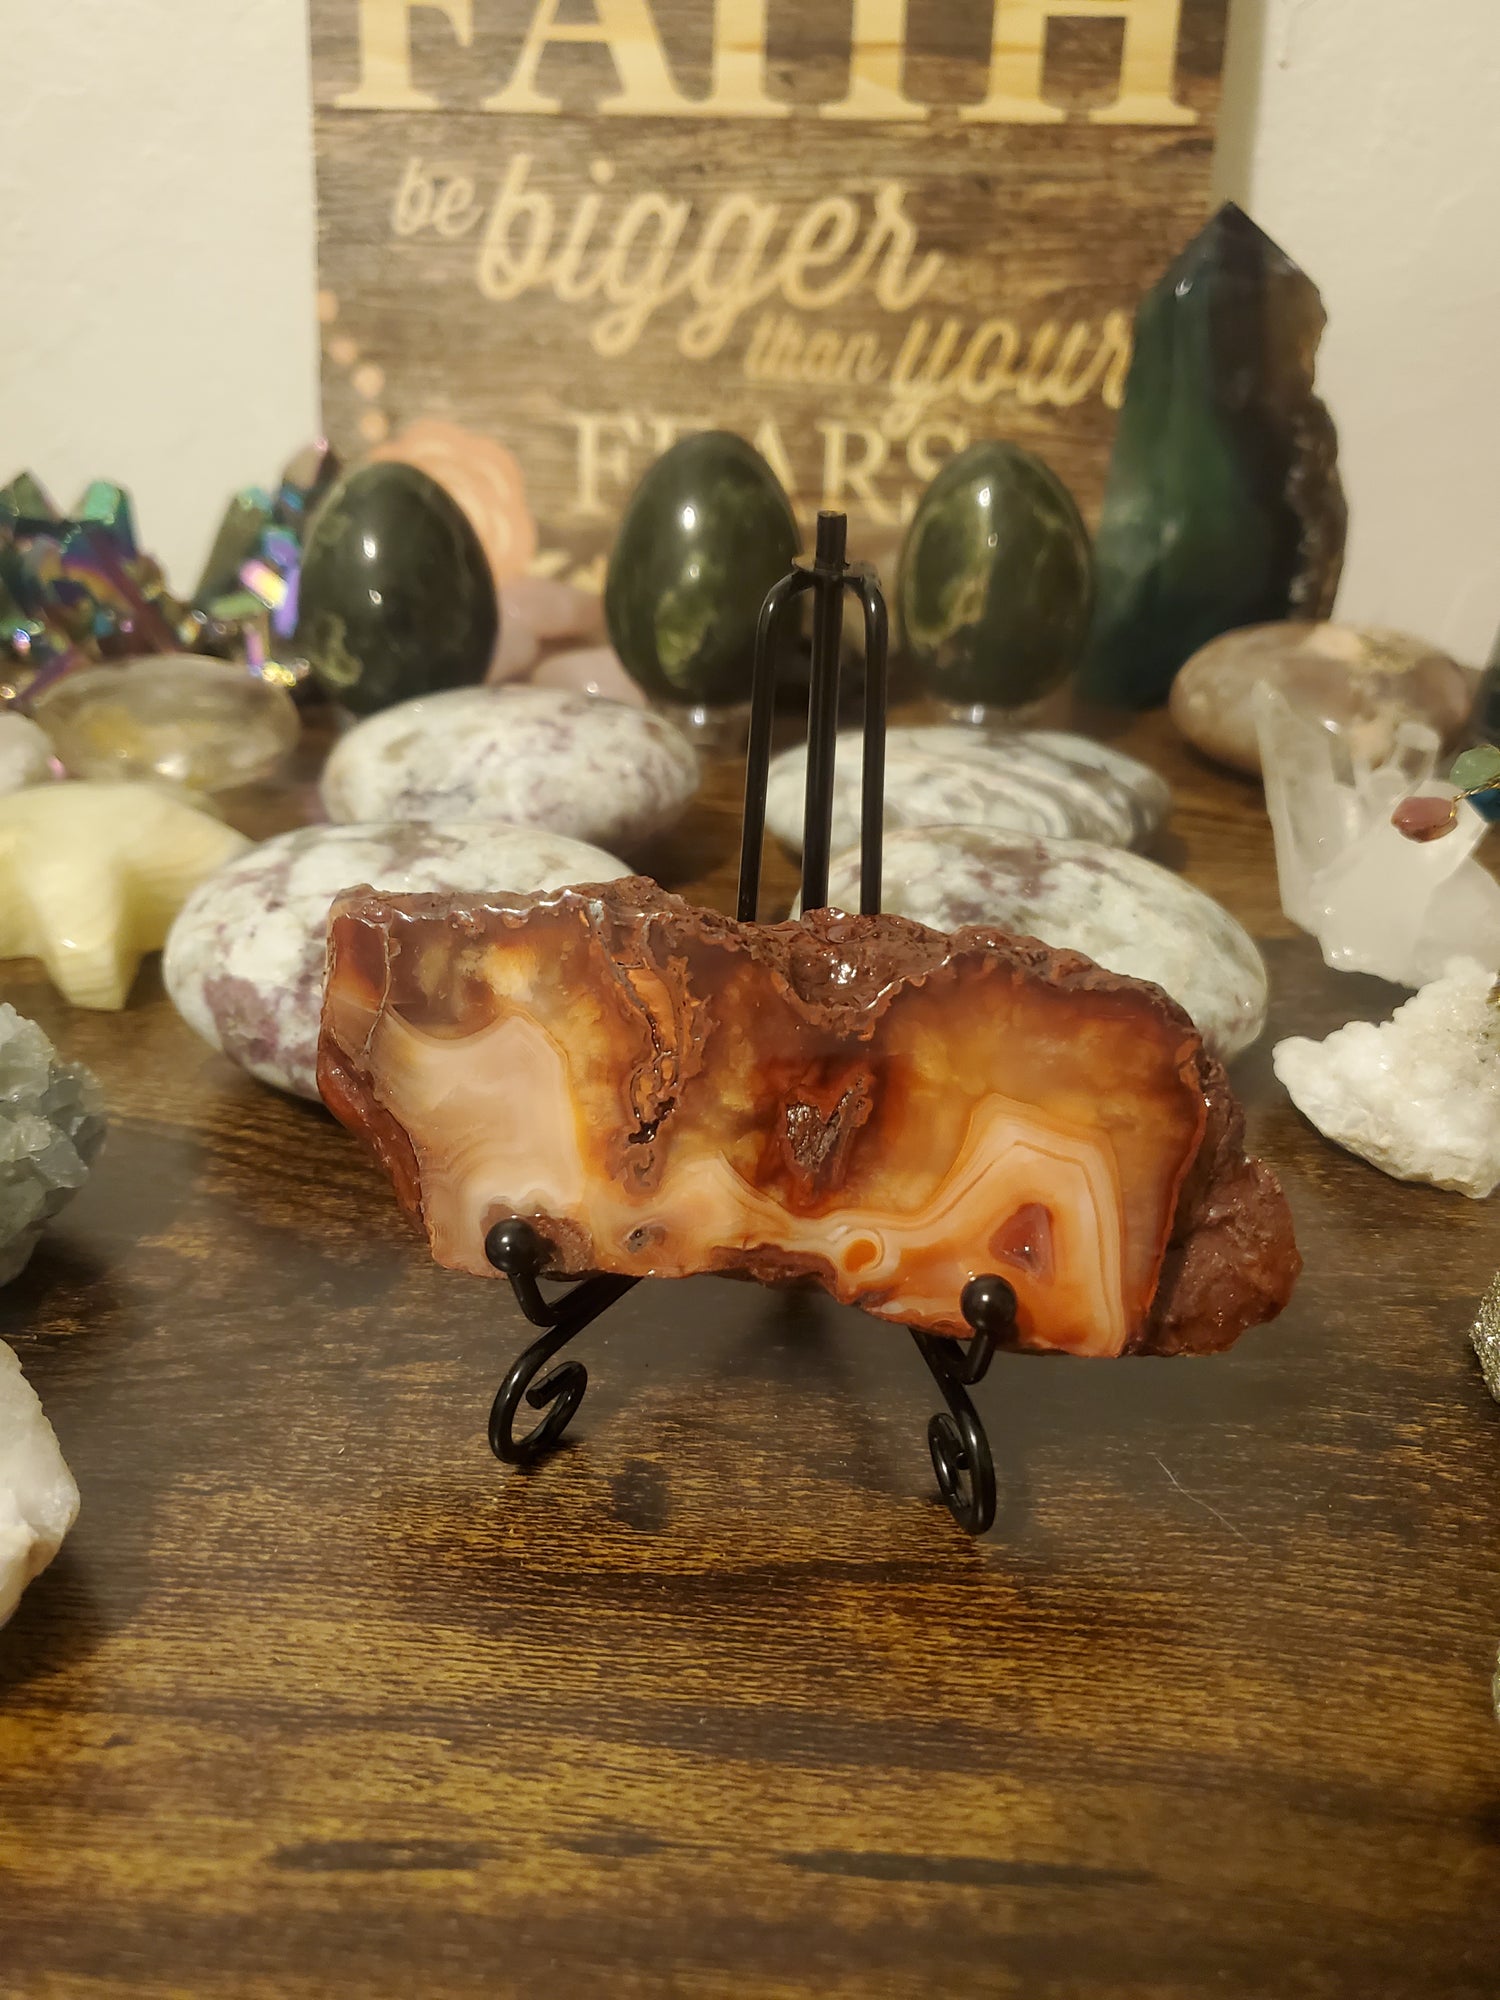 Carnelian crystal slabs with metal stand for anniversary gift,  birthday gift, collectible. - Healing Plants Miami